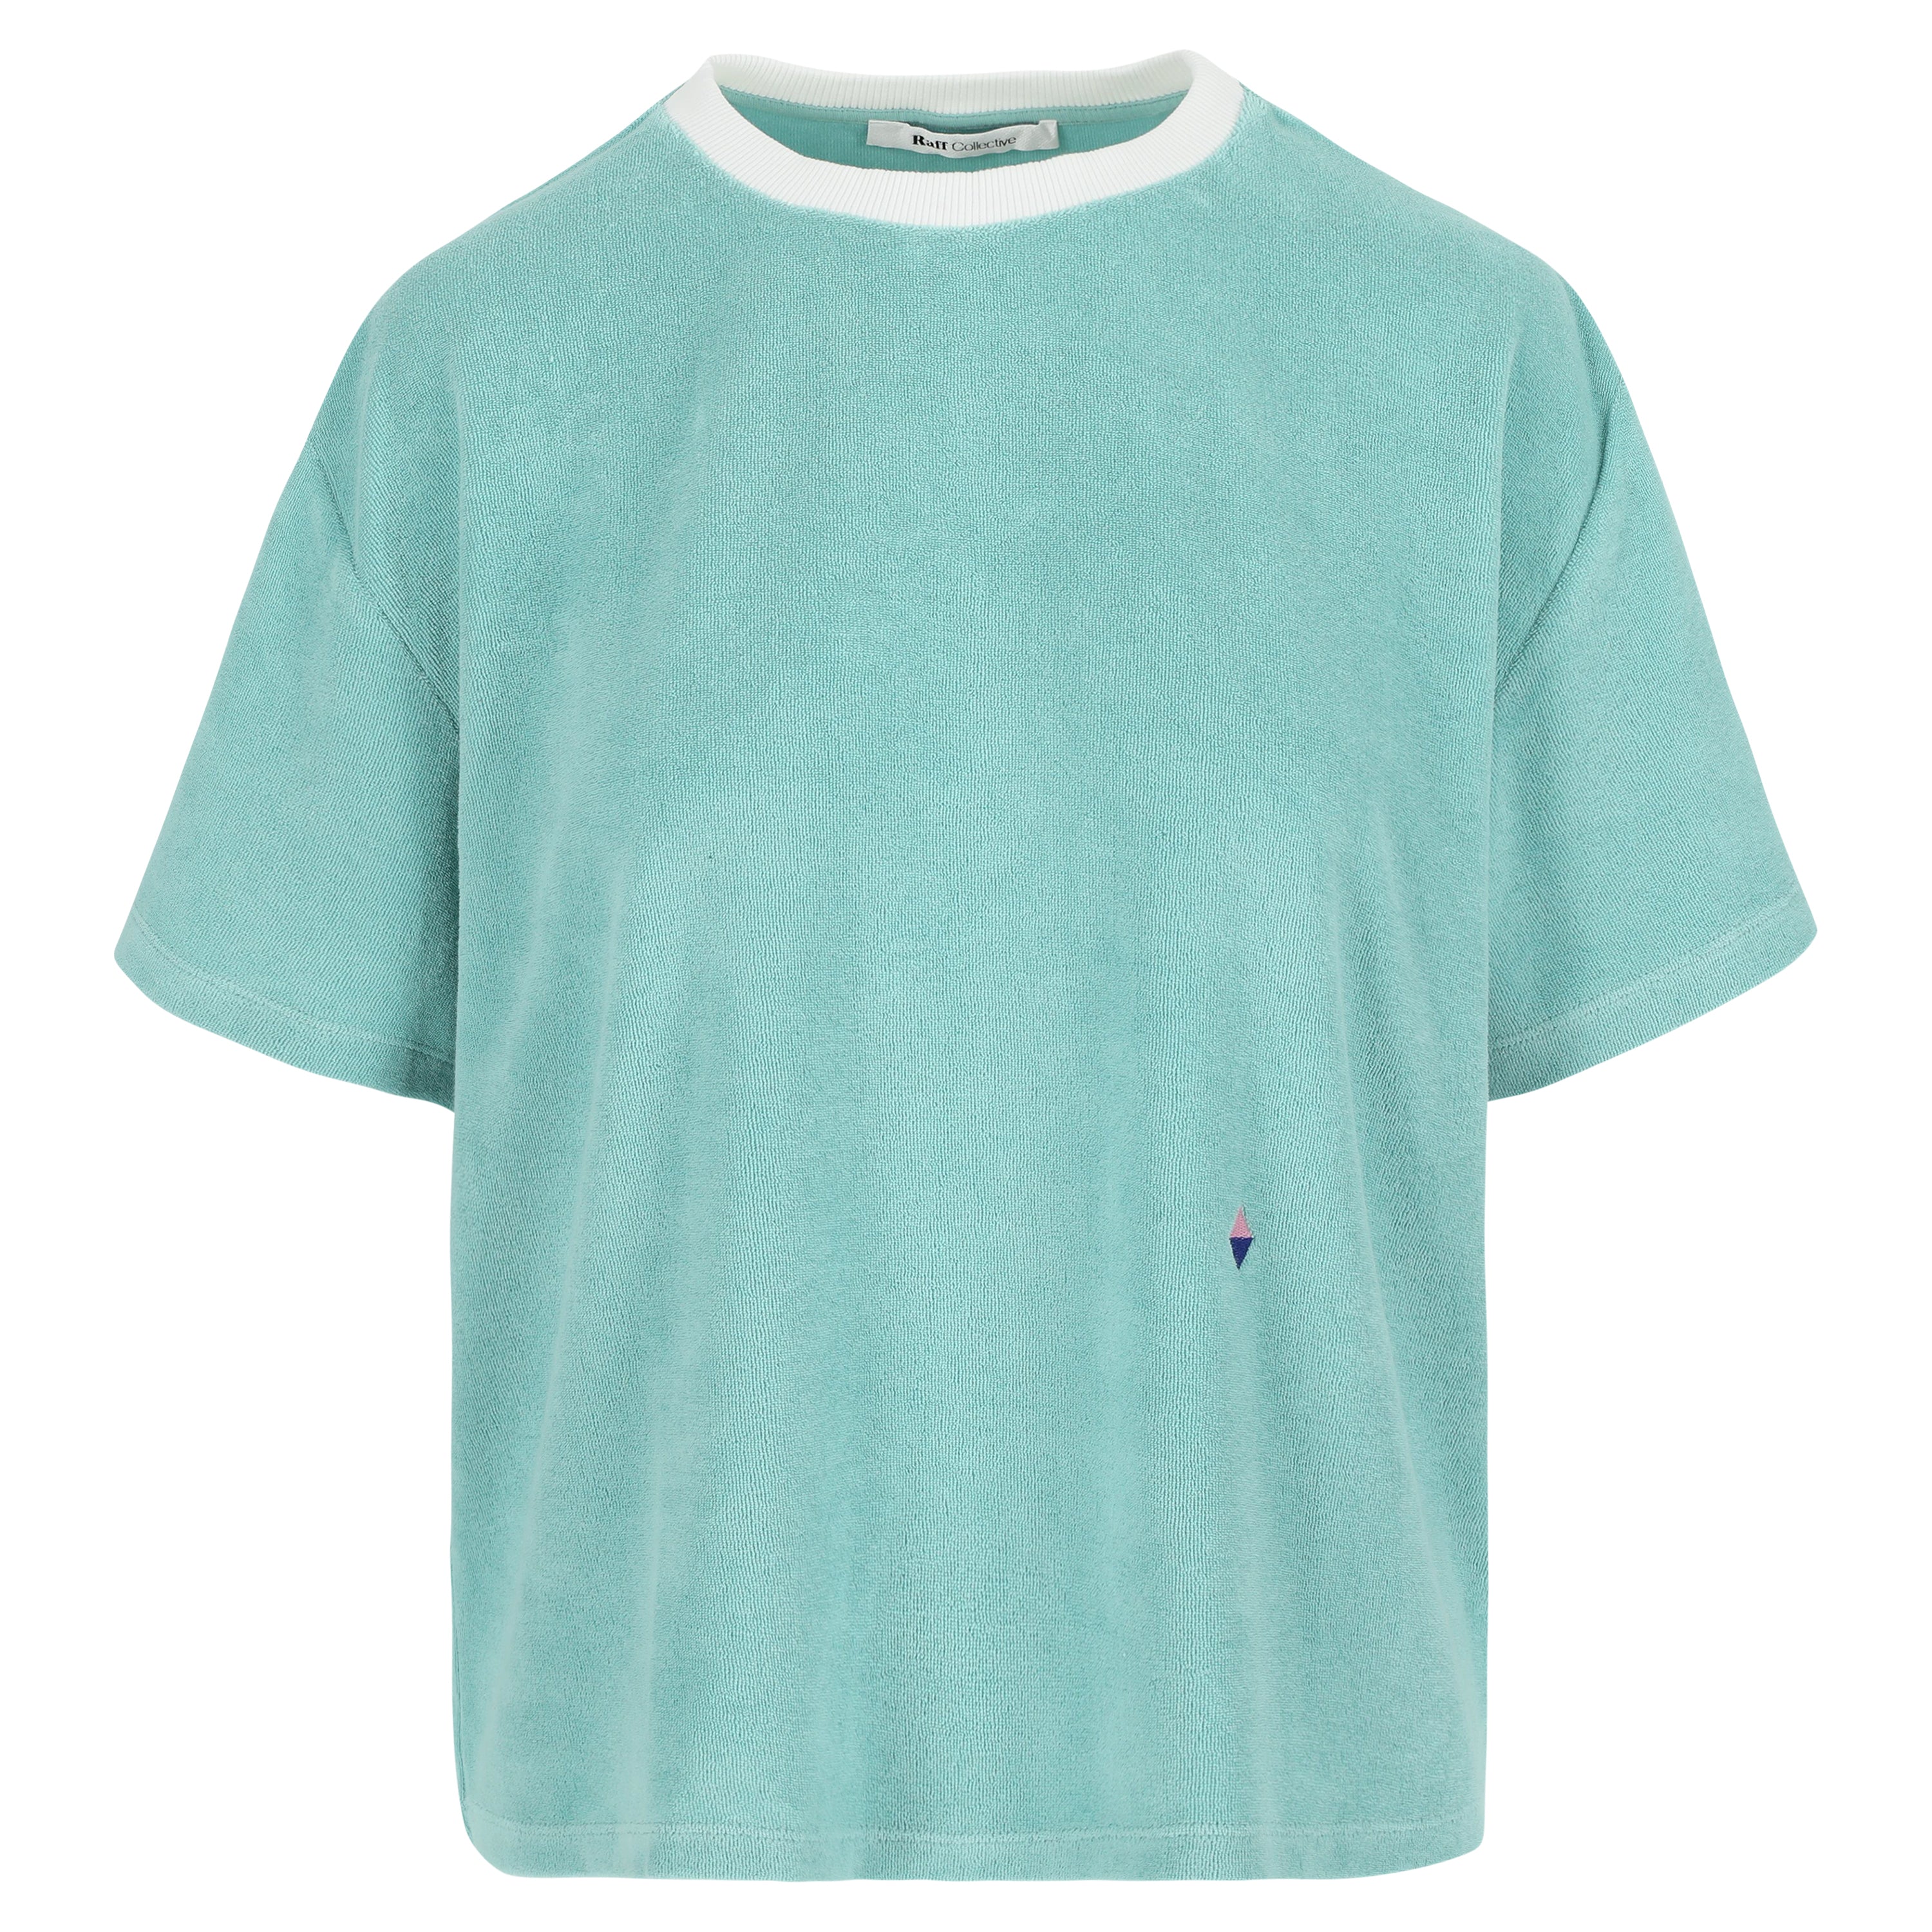 Belle Terry Towelling T-shirt Mint